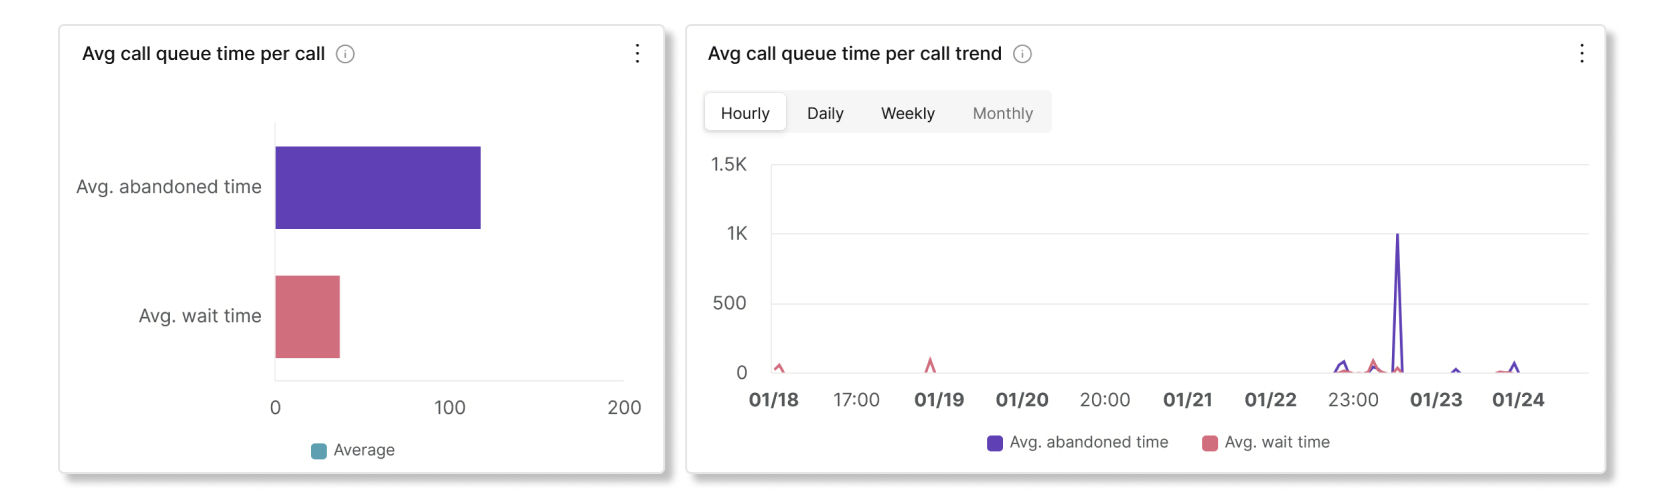 Avg call queue minutes per call and trend charts in call queue stats analytics